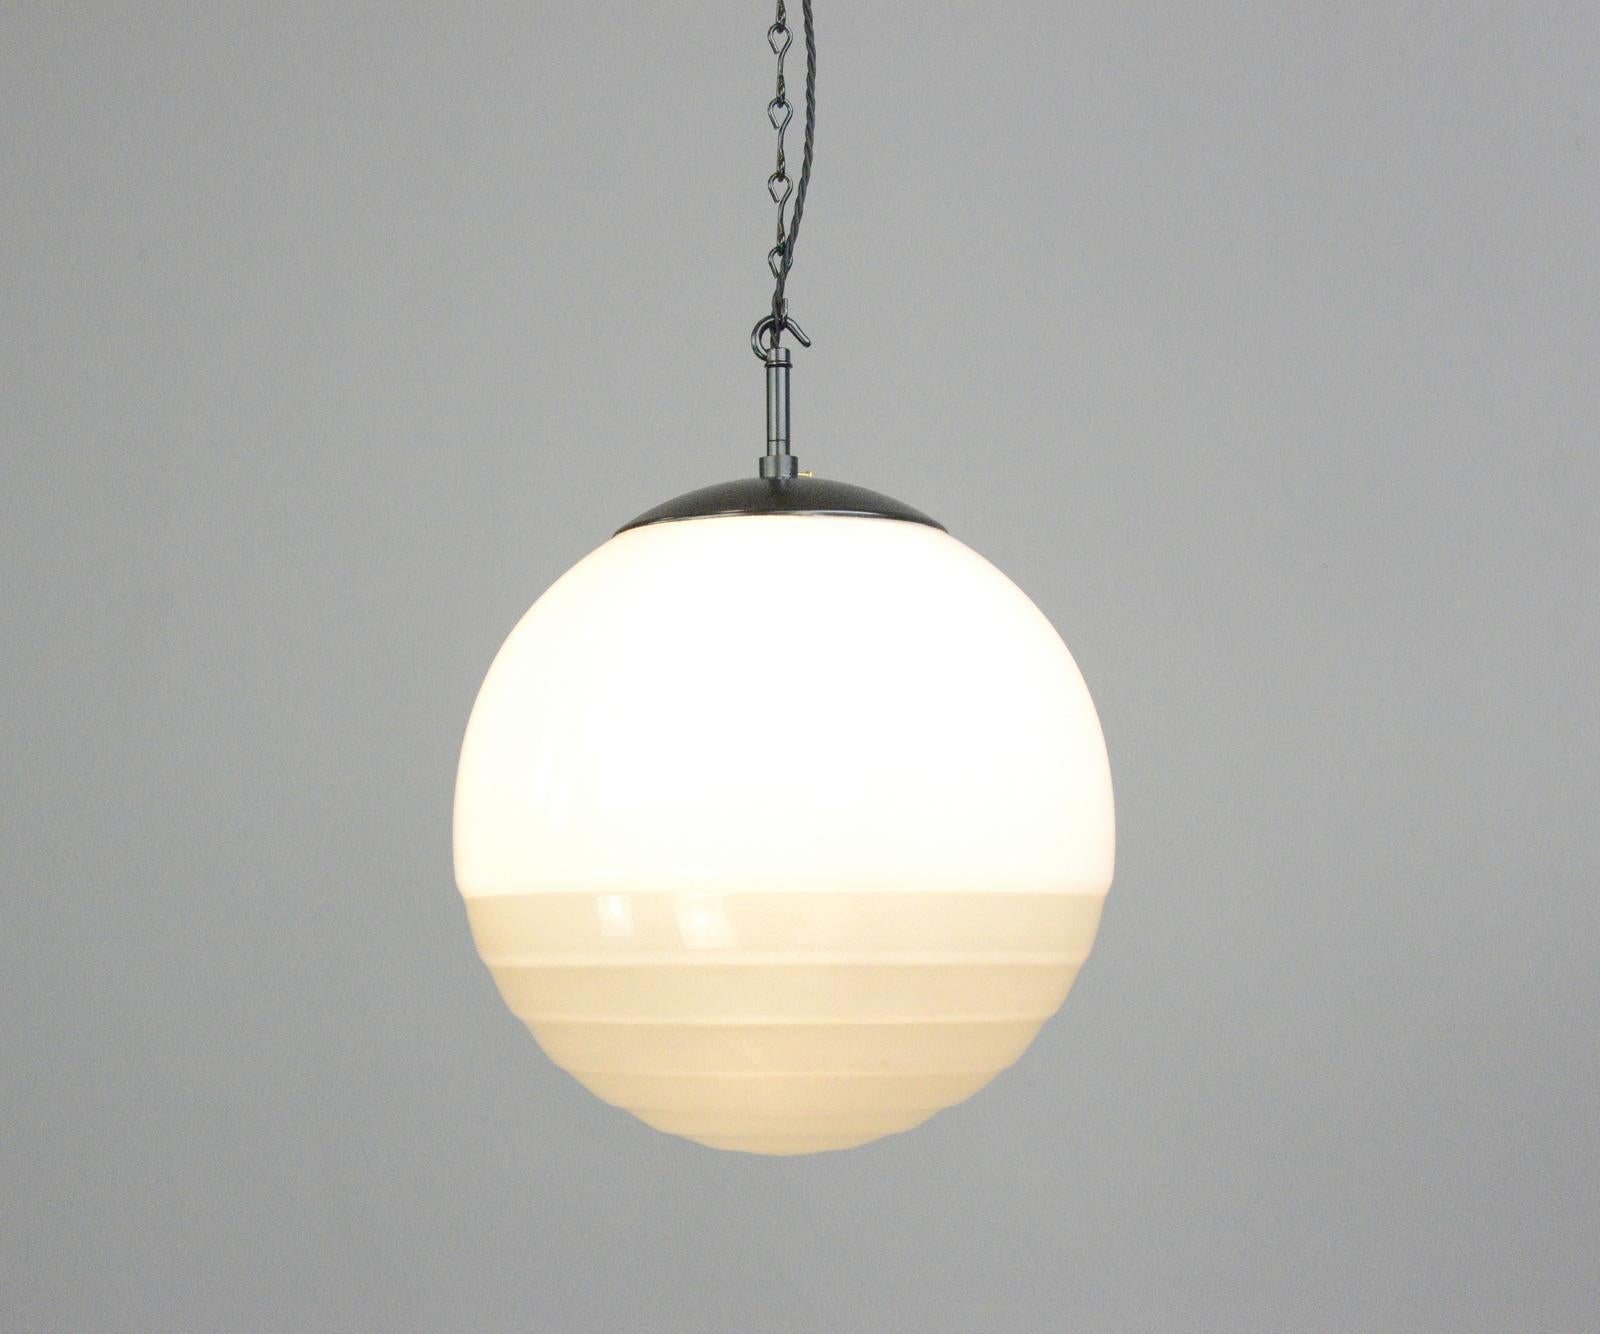 Bauhaus globe light by August Walther and Sohne Circa 1930s

- Opaline glass upper part 
- Stepped Acid etched lower part
- Bakelite galleries and matching ceiling roses
- Comes with 150cm of cable and chain
- Takes E27 fitting bulbs
-